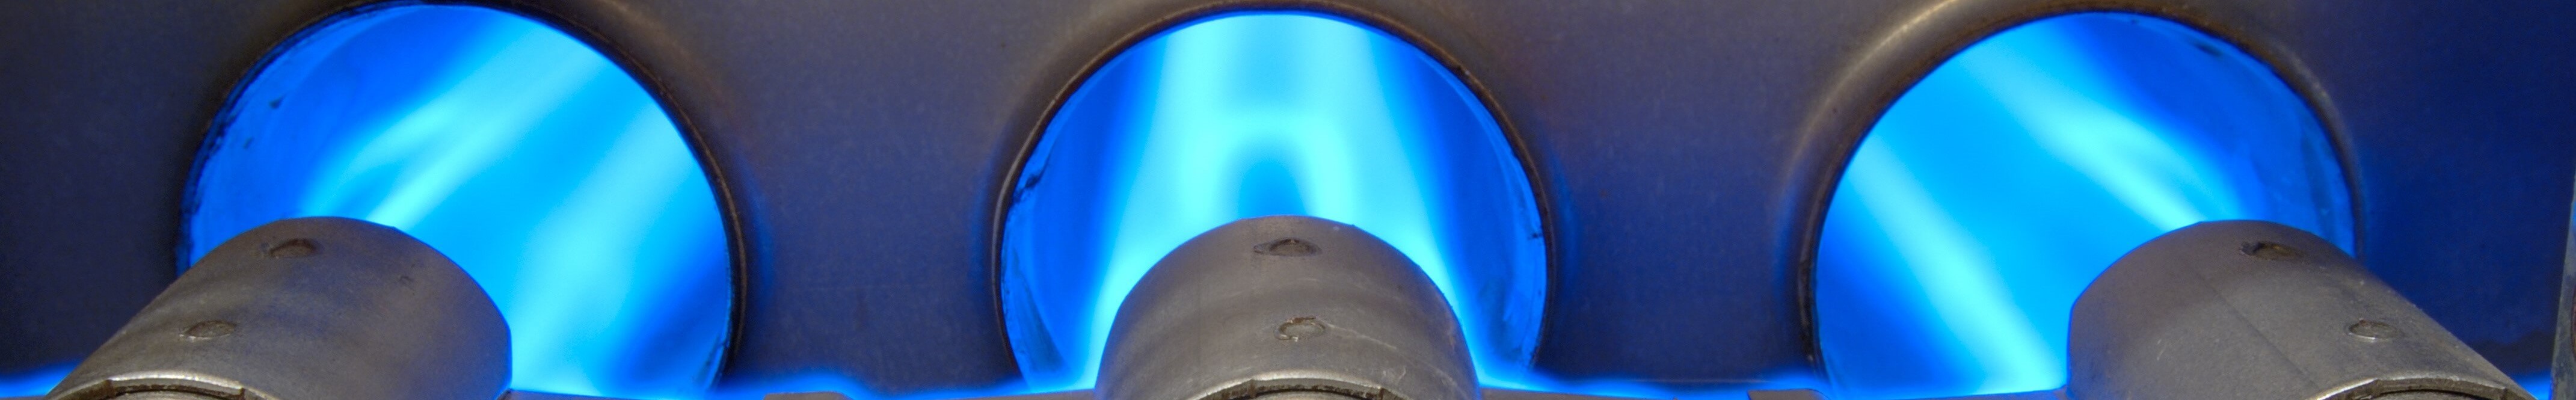 Blue flames from a gas furnace